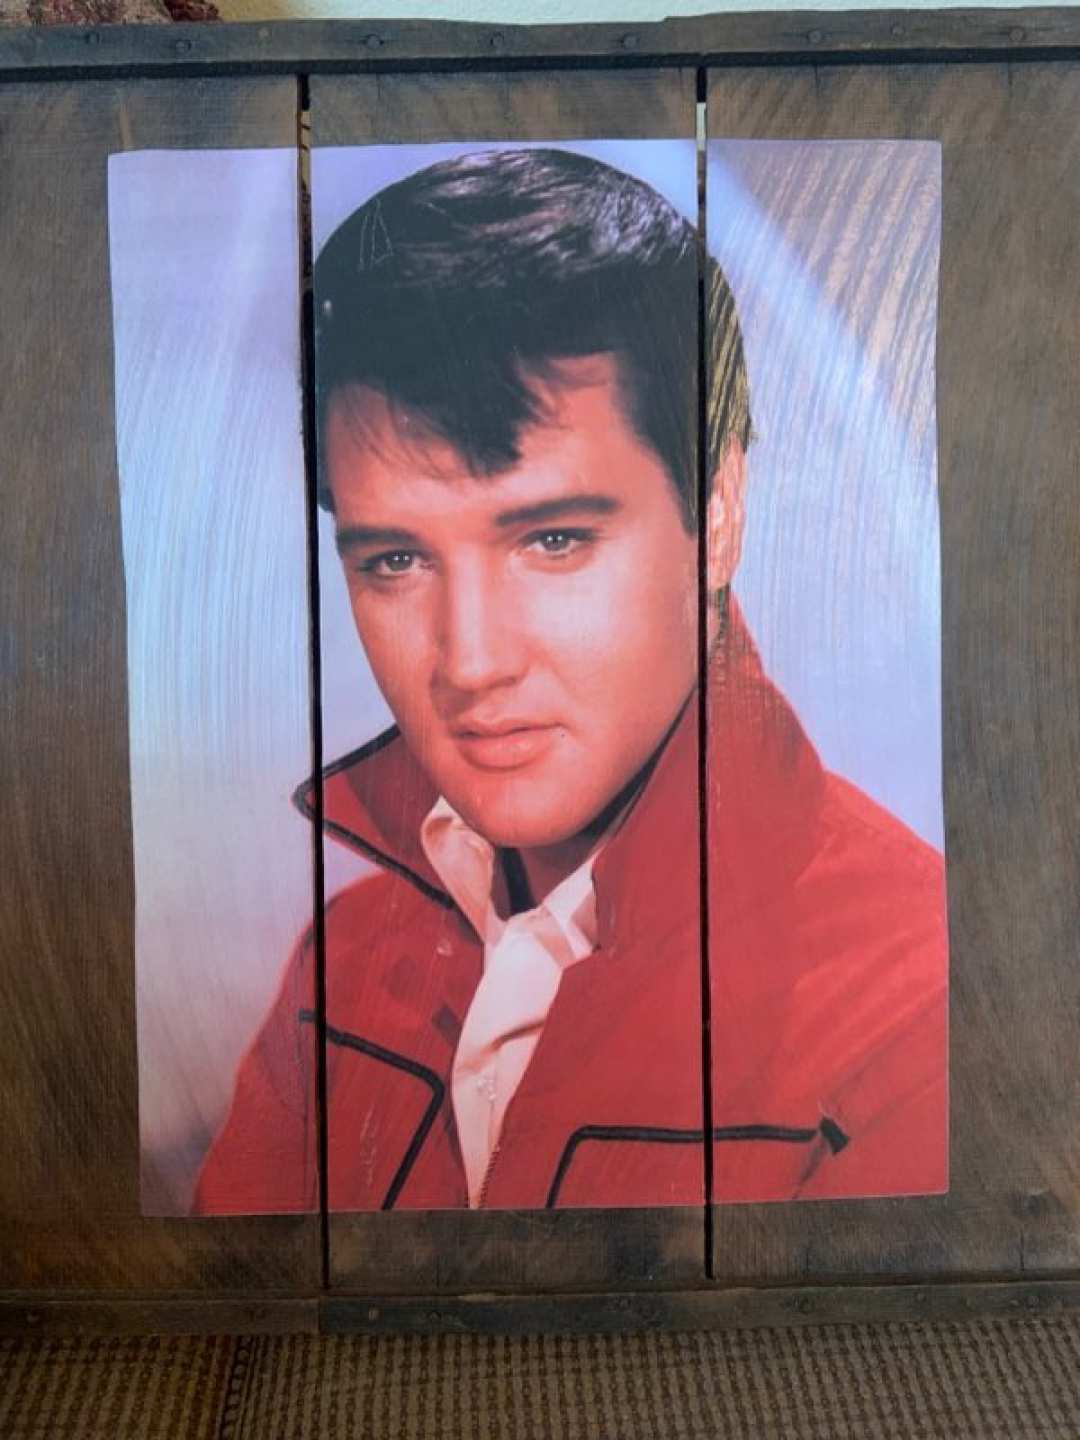 0th Image of a N/A ELVIS PRESLEY PORTRAIT